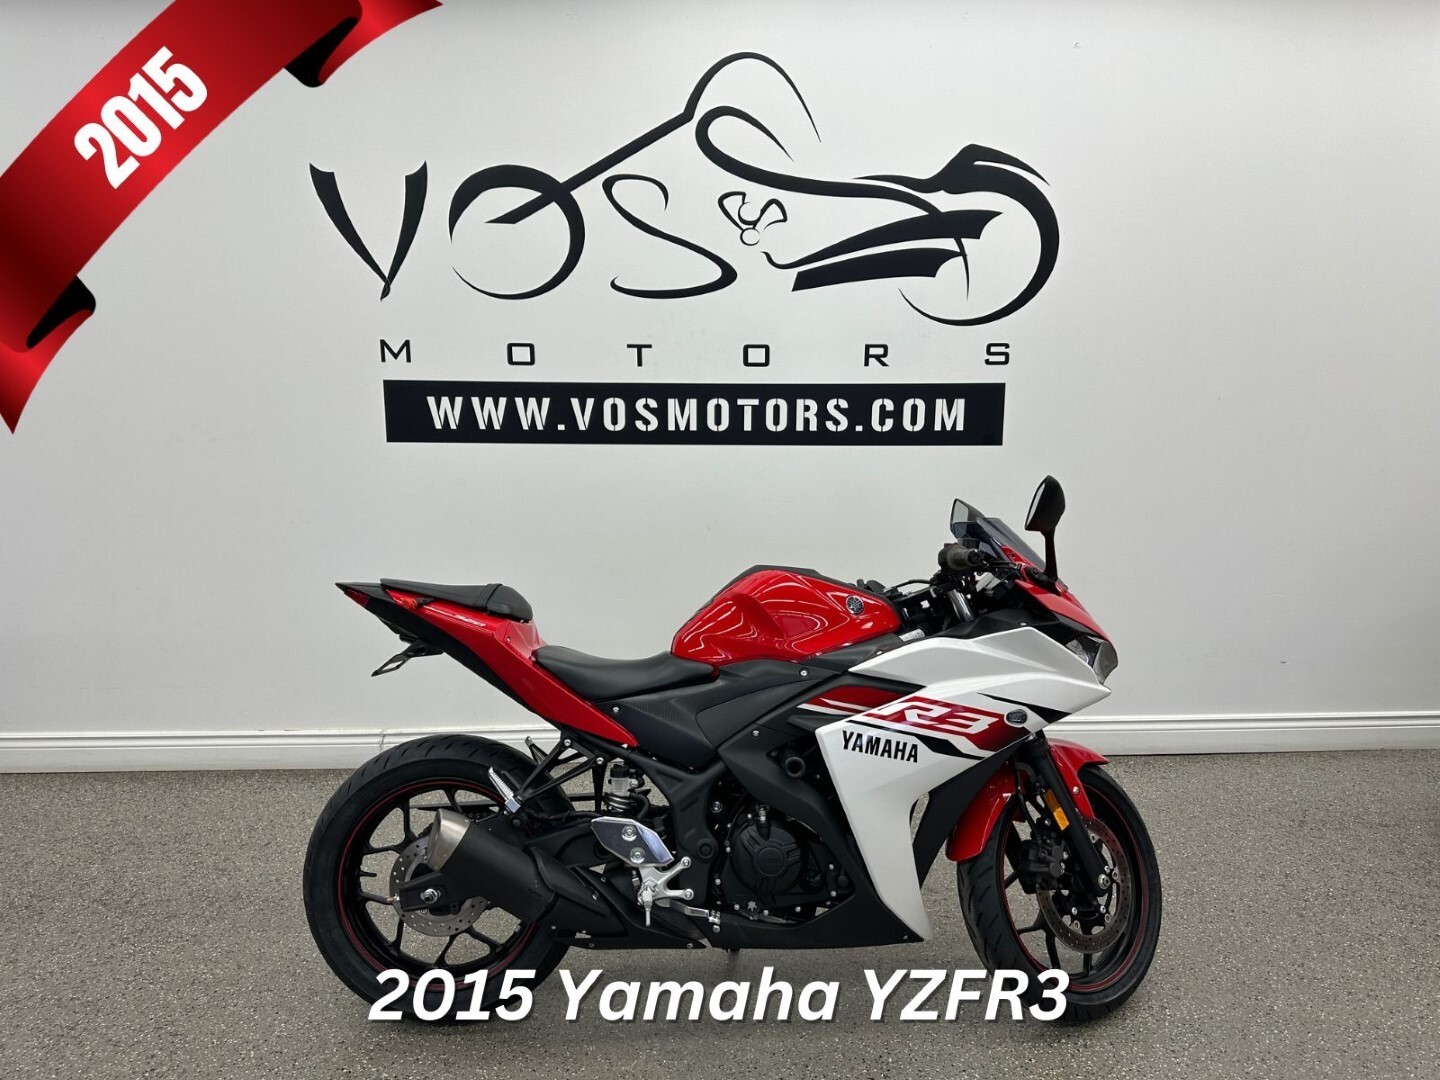 2015 Yamaha YZFR3FR YZF R3 - V5997 - -No Payments for 1 Year**